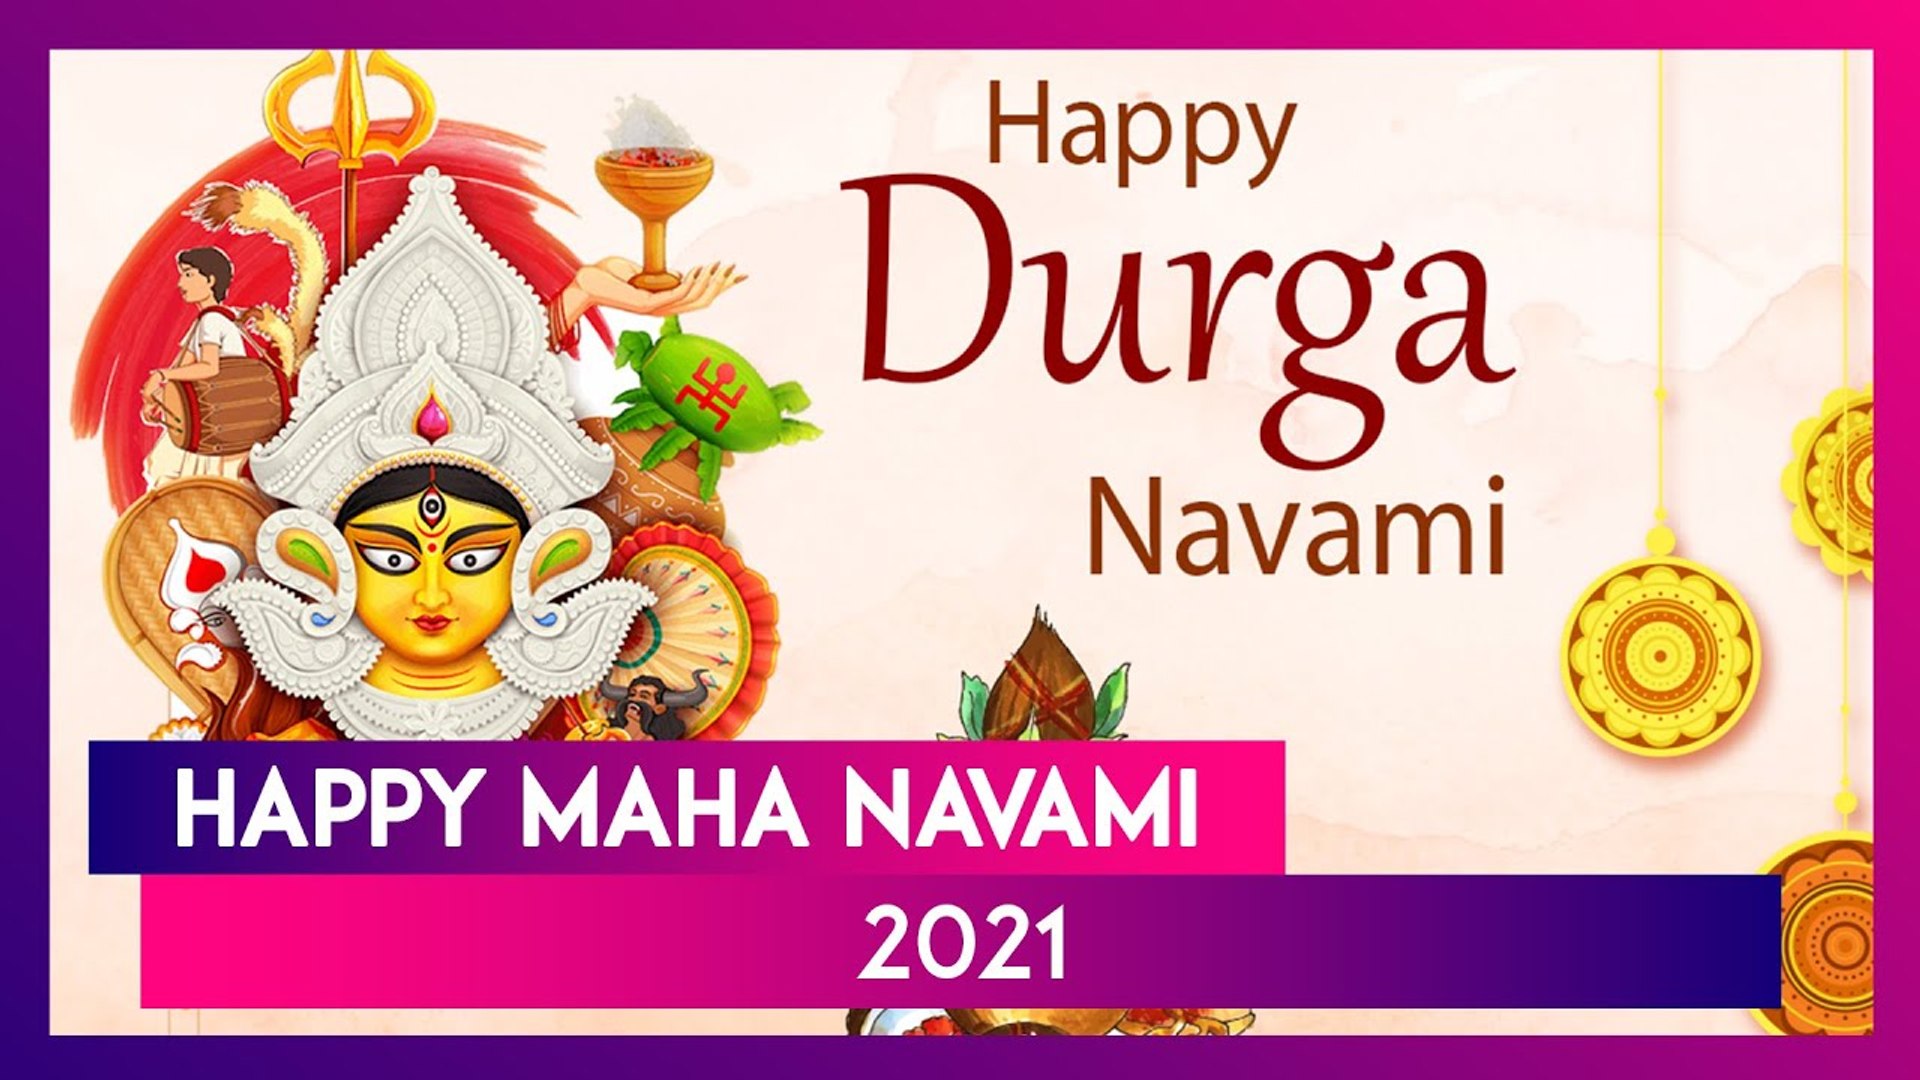 Happy Maha Navami 2021 Greetings: WhatsApp Messages, Images & Wallpapers To  Send Subho Navami Wishes - video Dailymotion